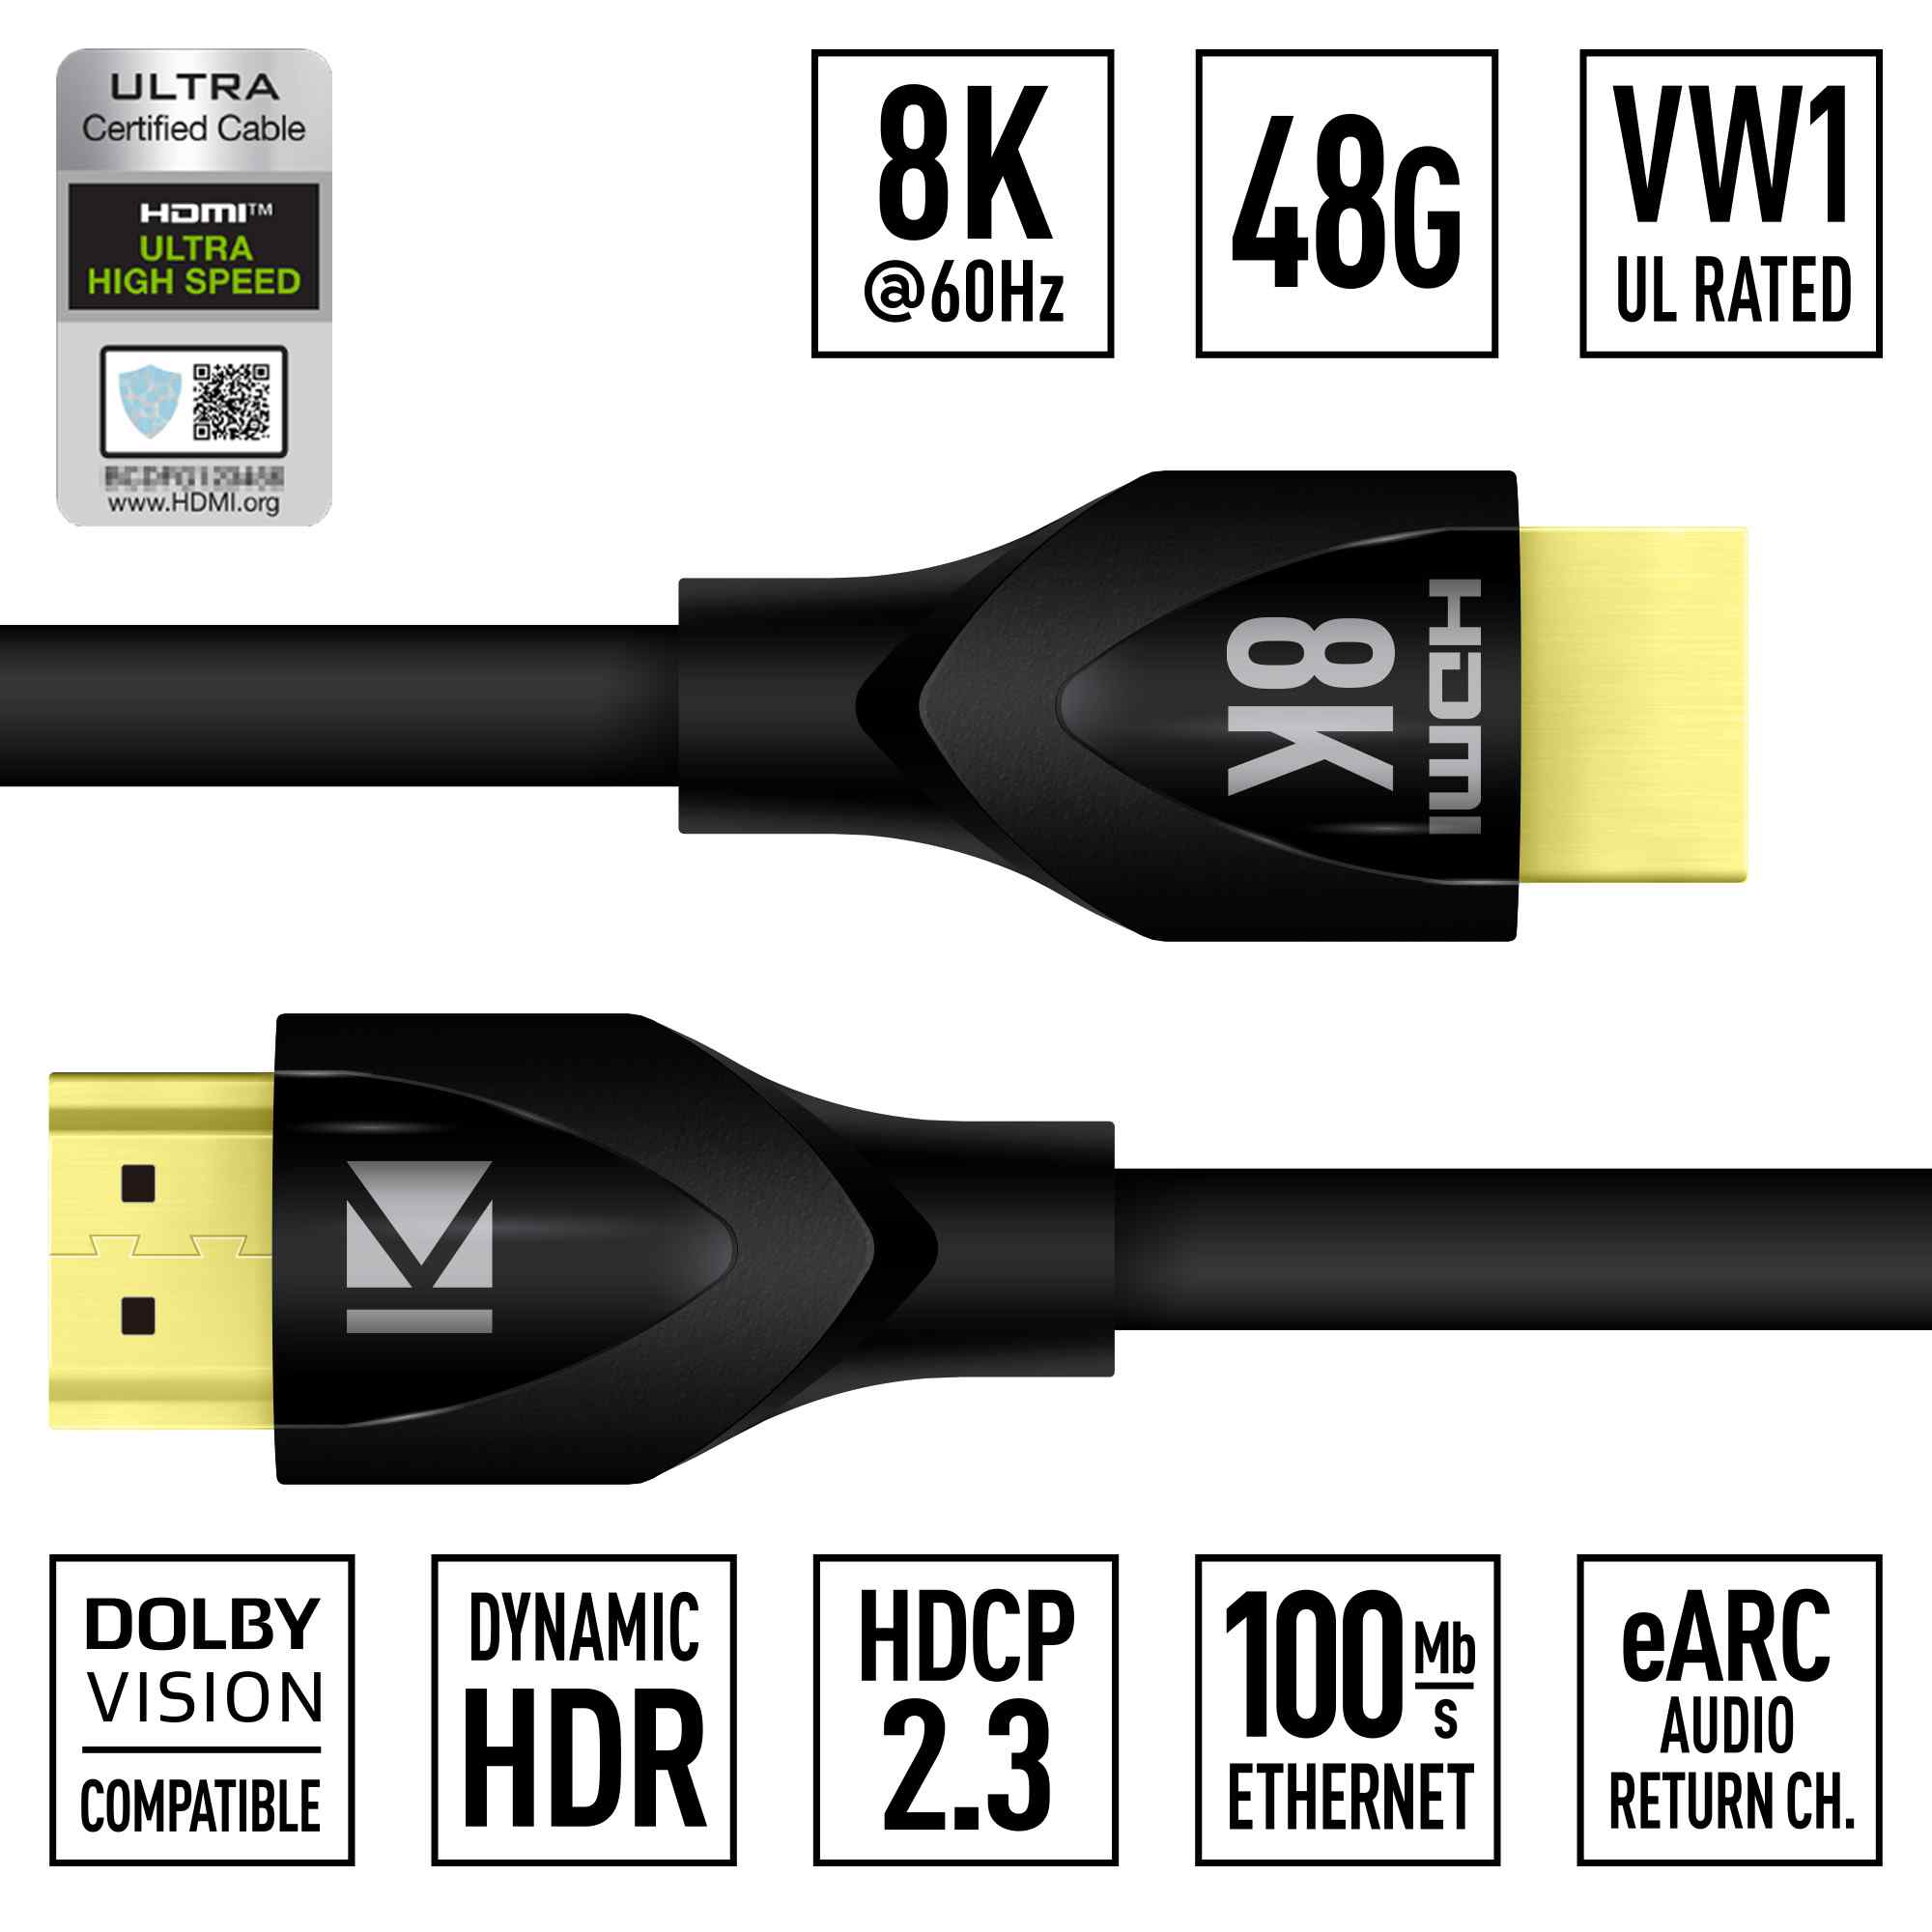 Thumbnail of Key Digital high speed hdmi cable Product Image